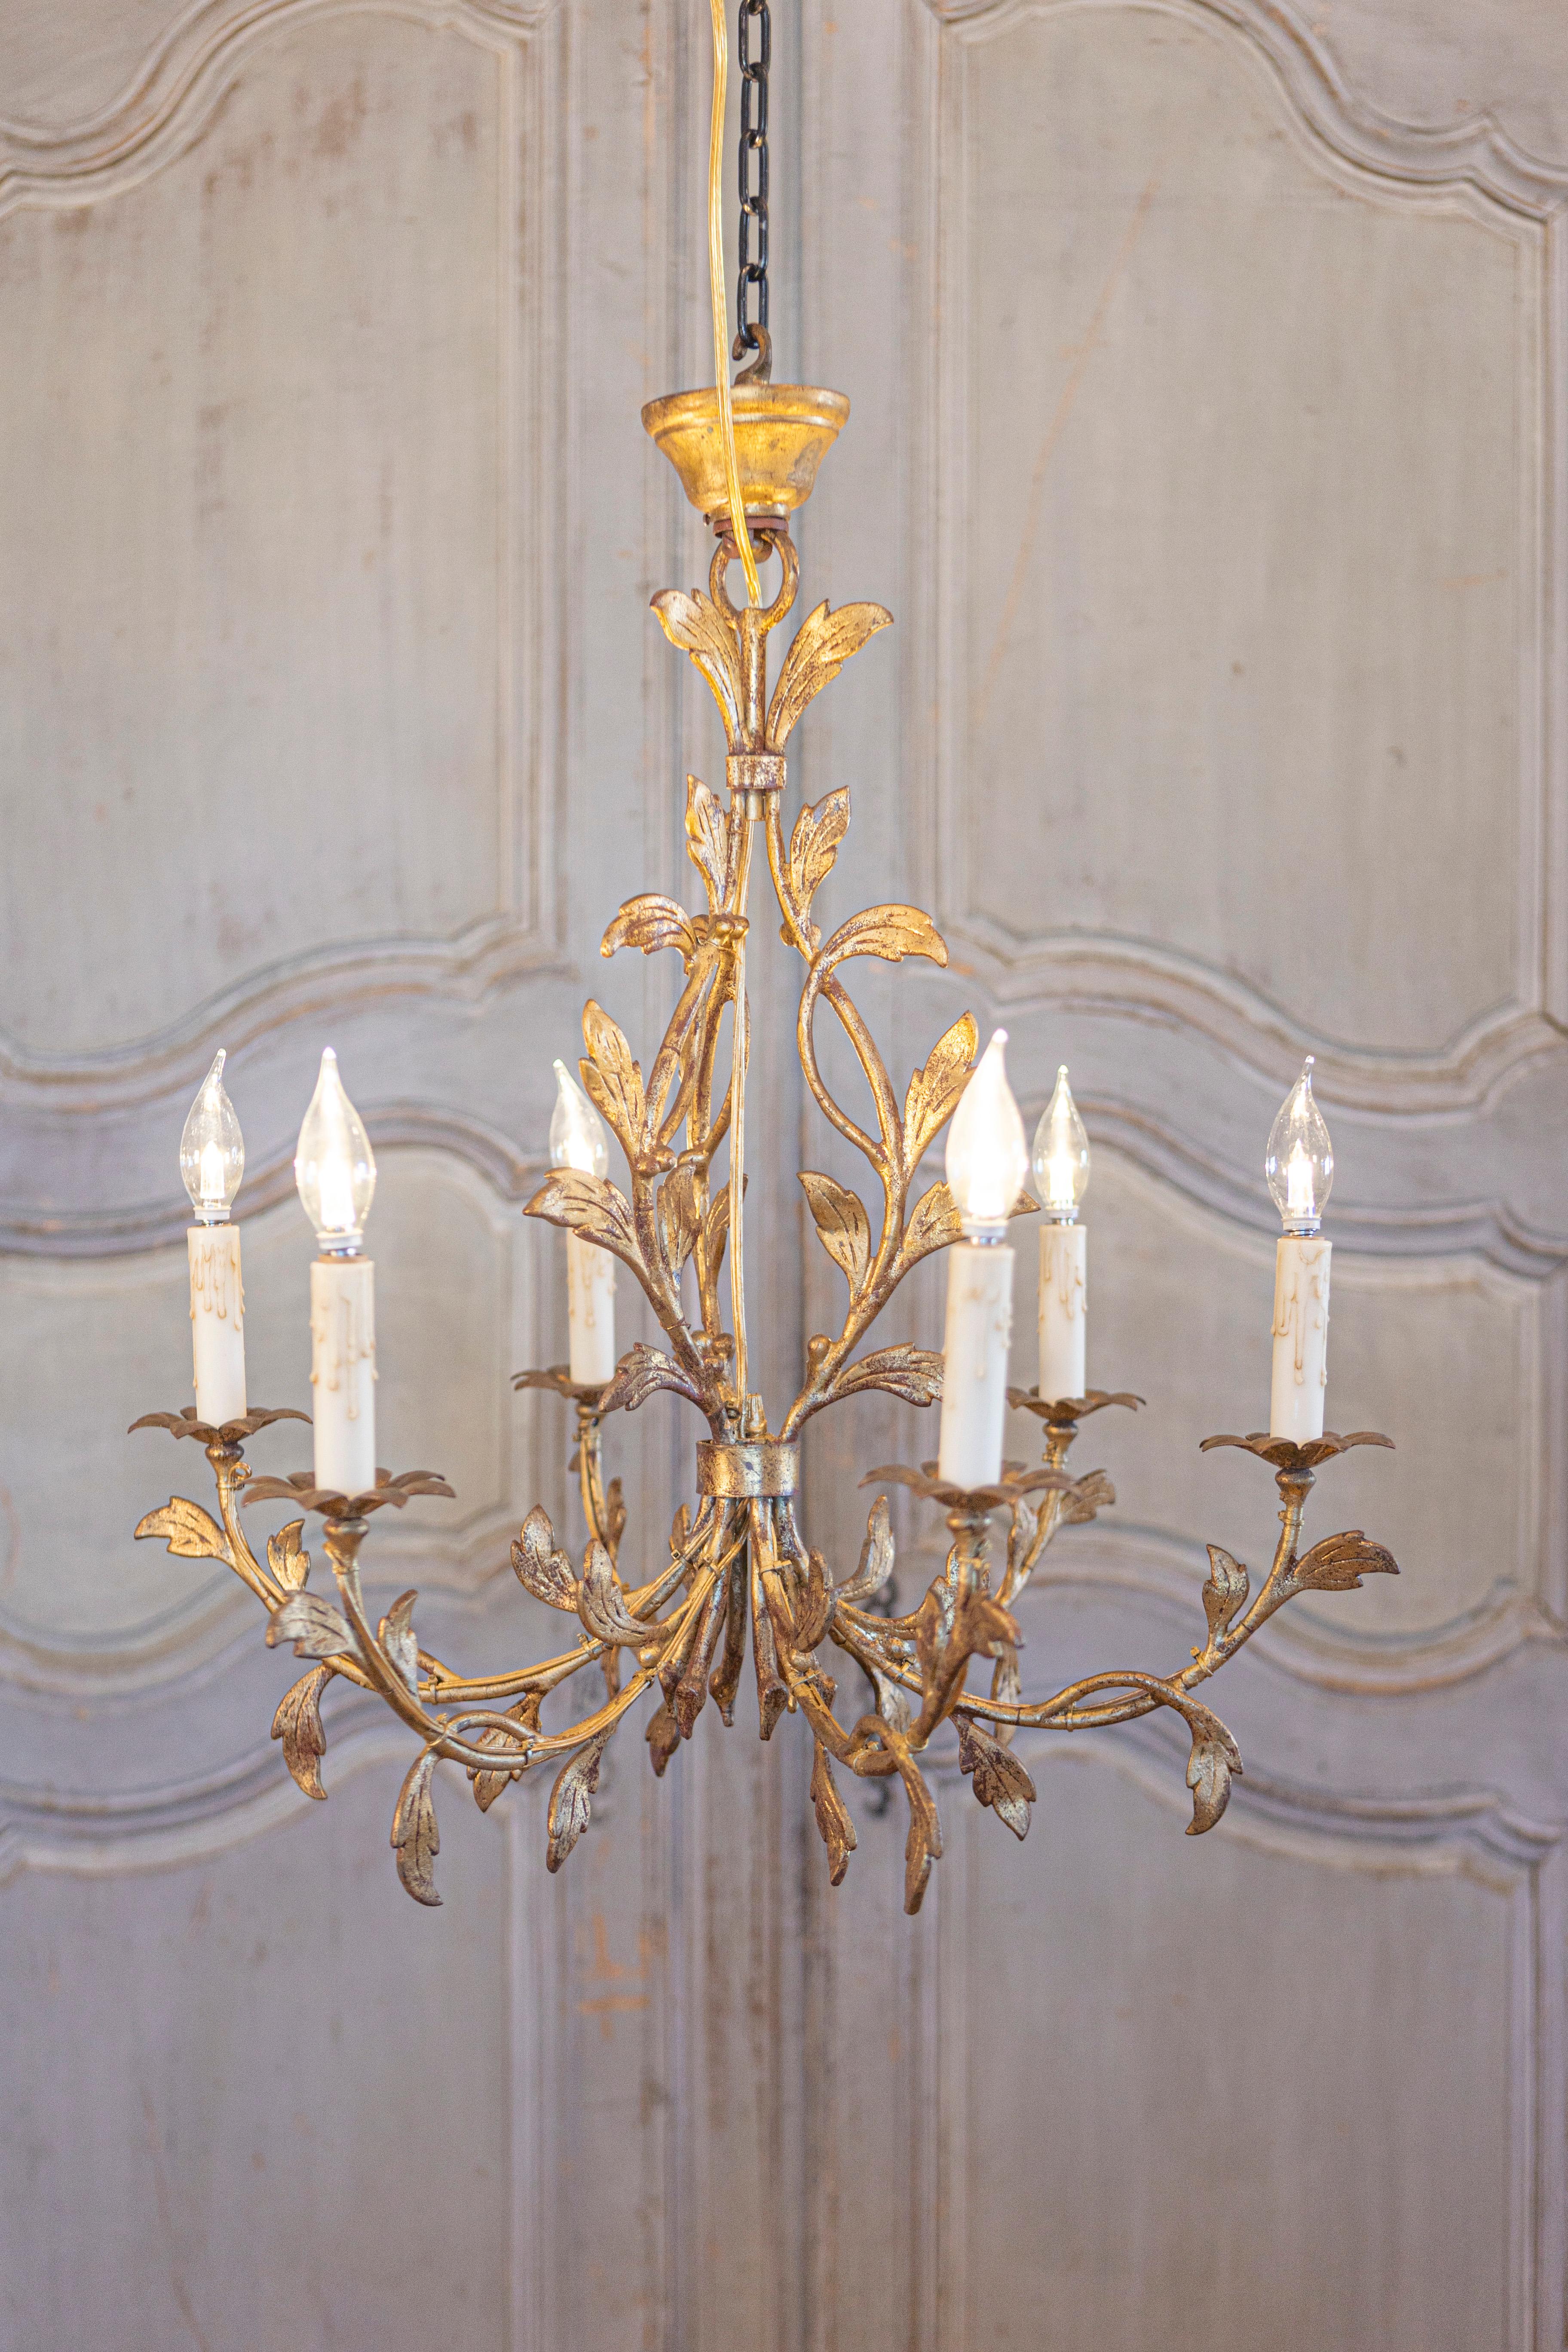 A French gilded iron six-light chandelier with foliage motifs. This French gilded iron chandelier, a treasure from the 20th century, enchants with its six lights and a symphony of foliage motifs that dance across its structure. The chandelier's